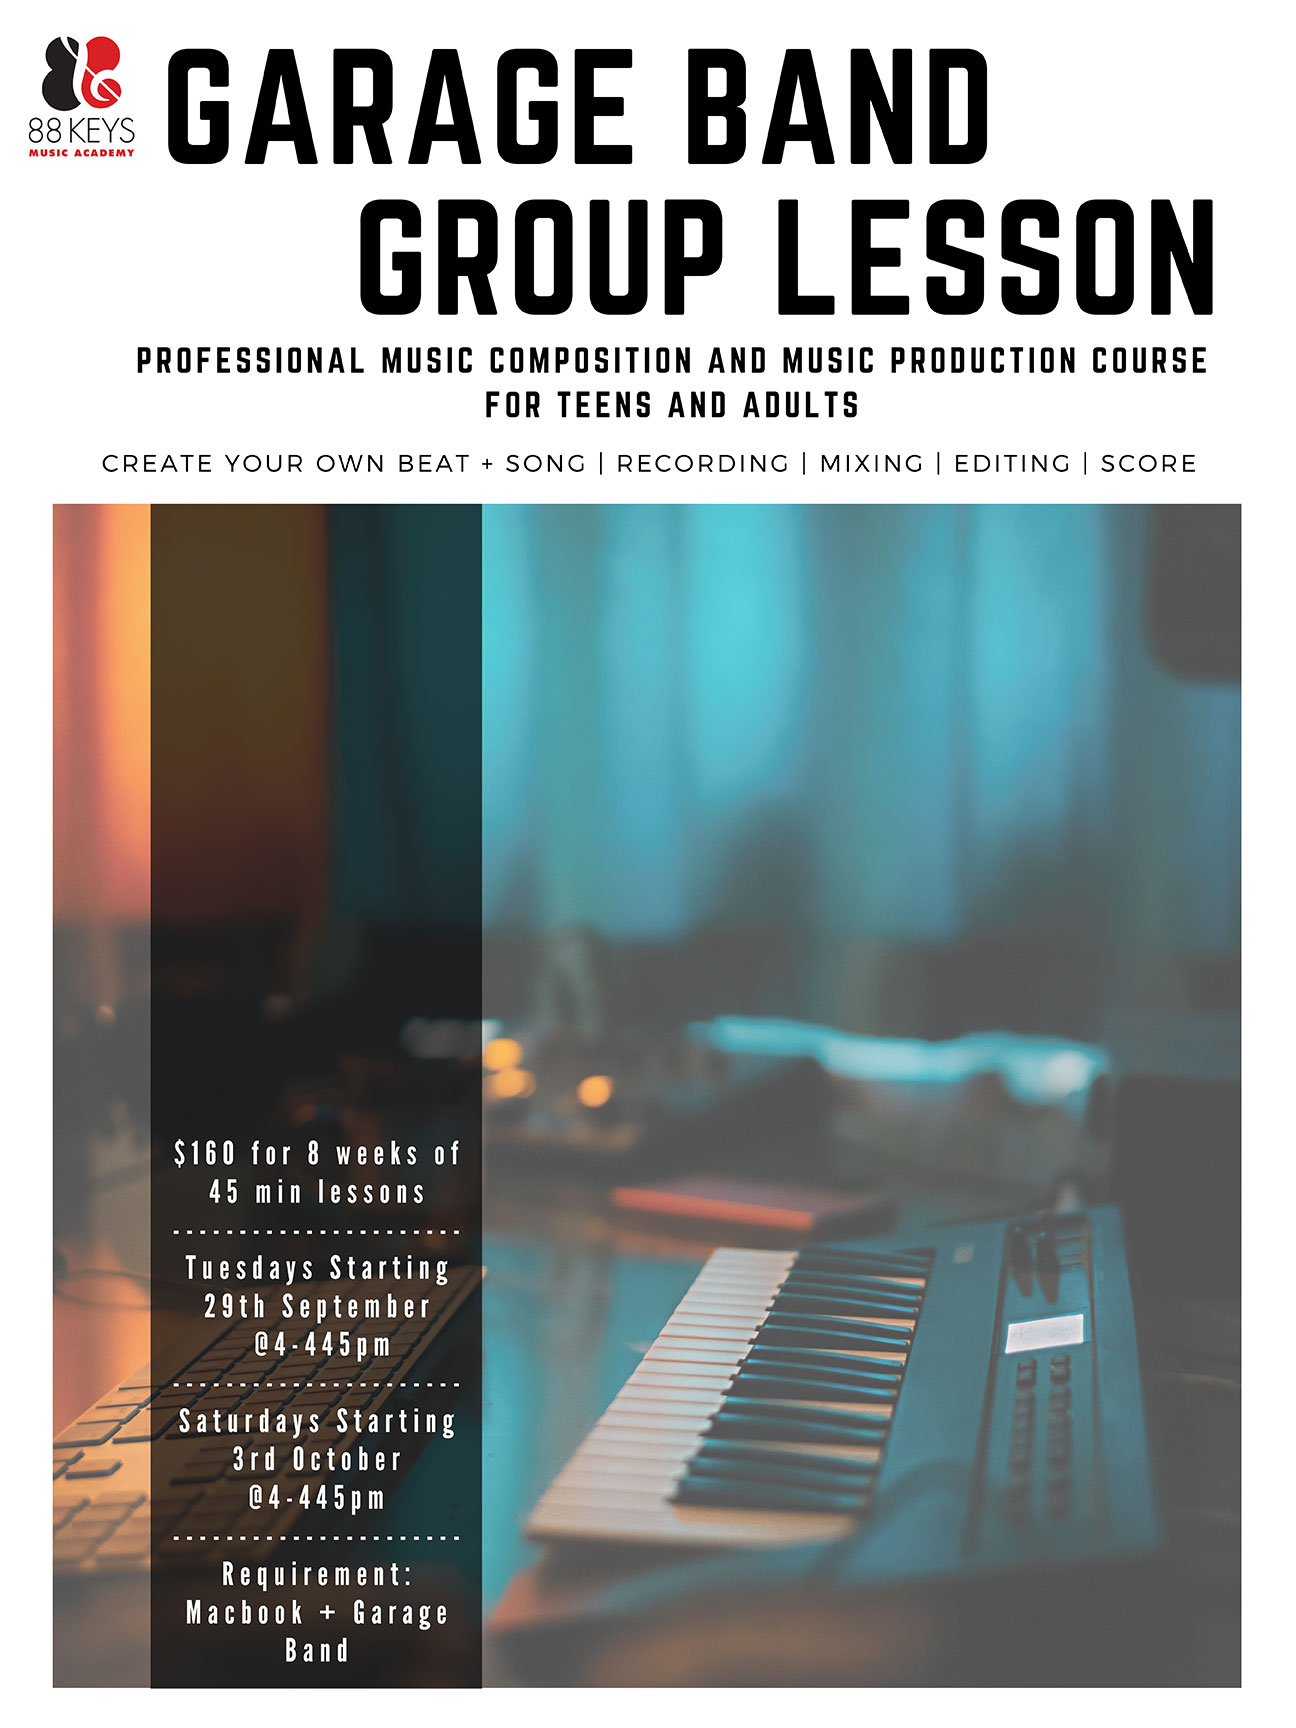 Garage Band Group Lesson